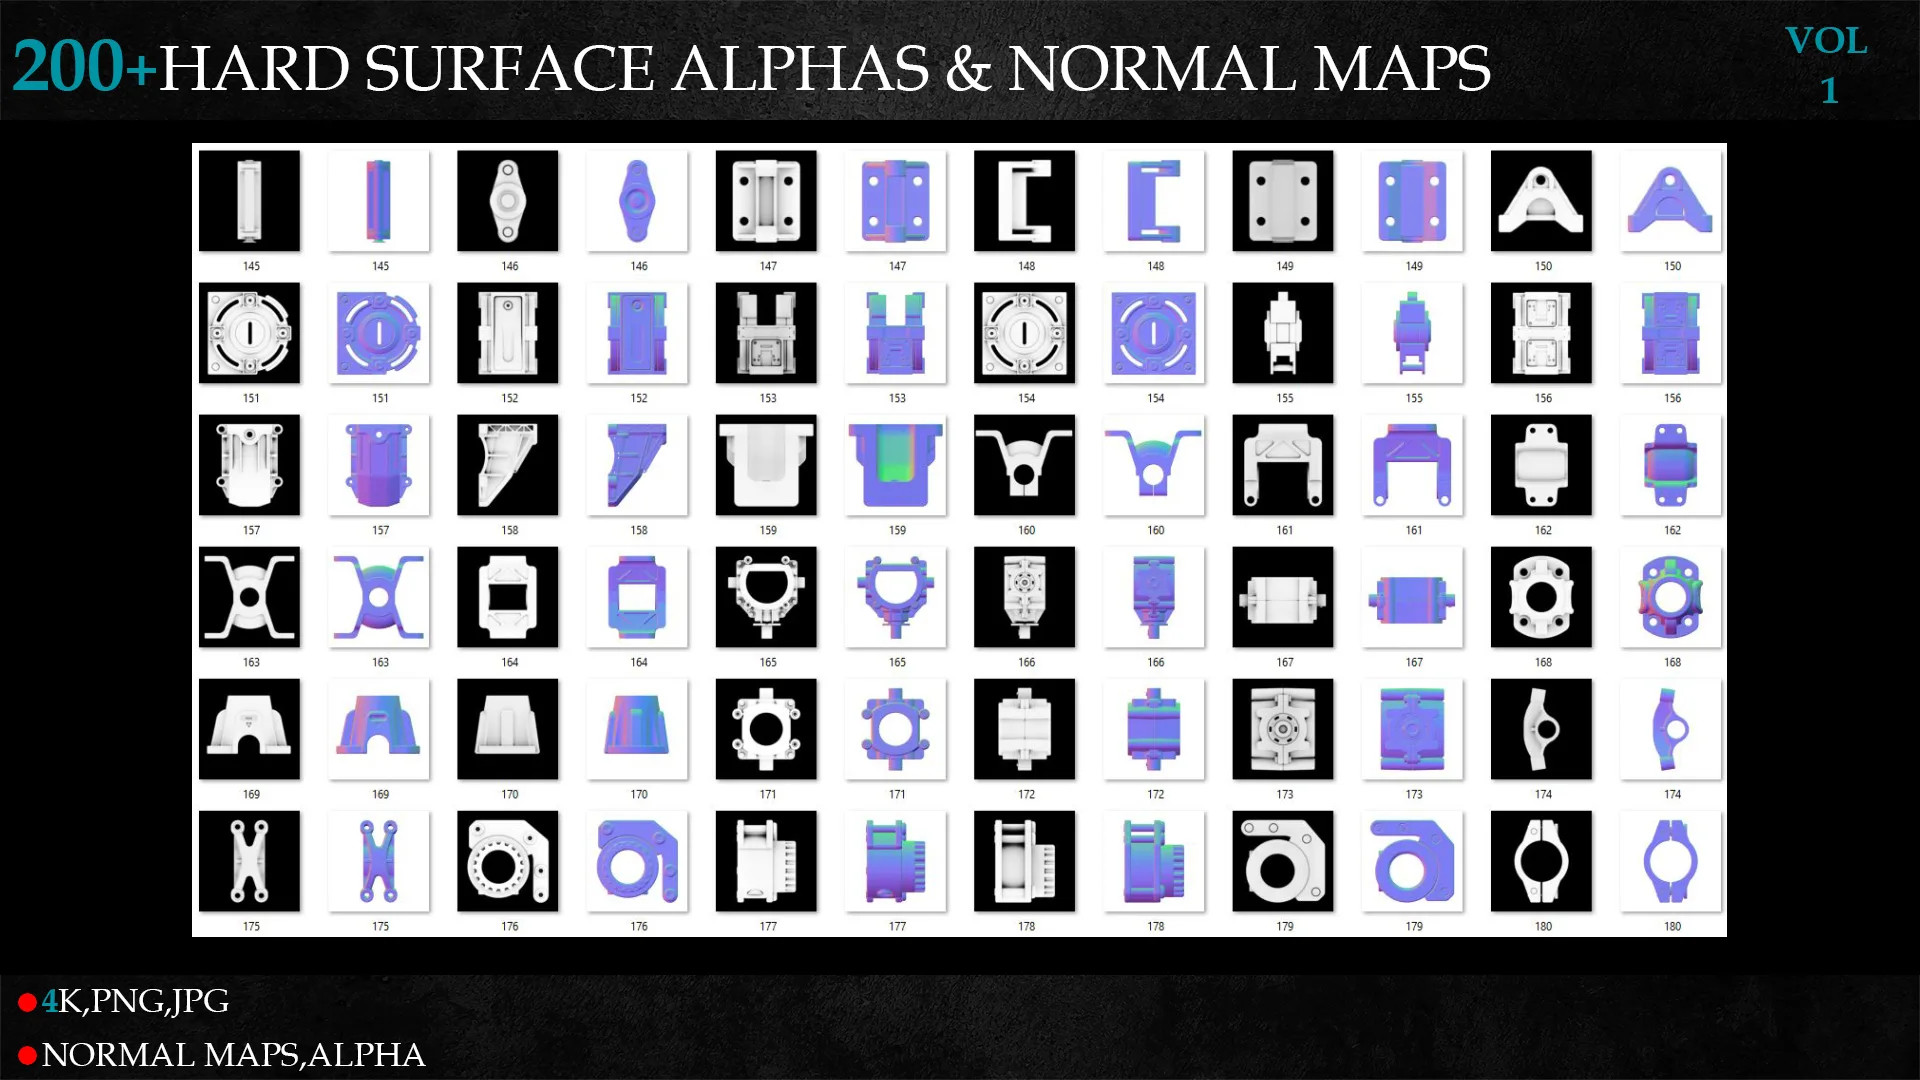 200+HARD SURFACE ALPHAS & NORMAL MAPS-vol 1